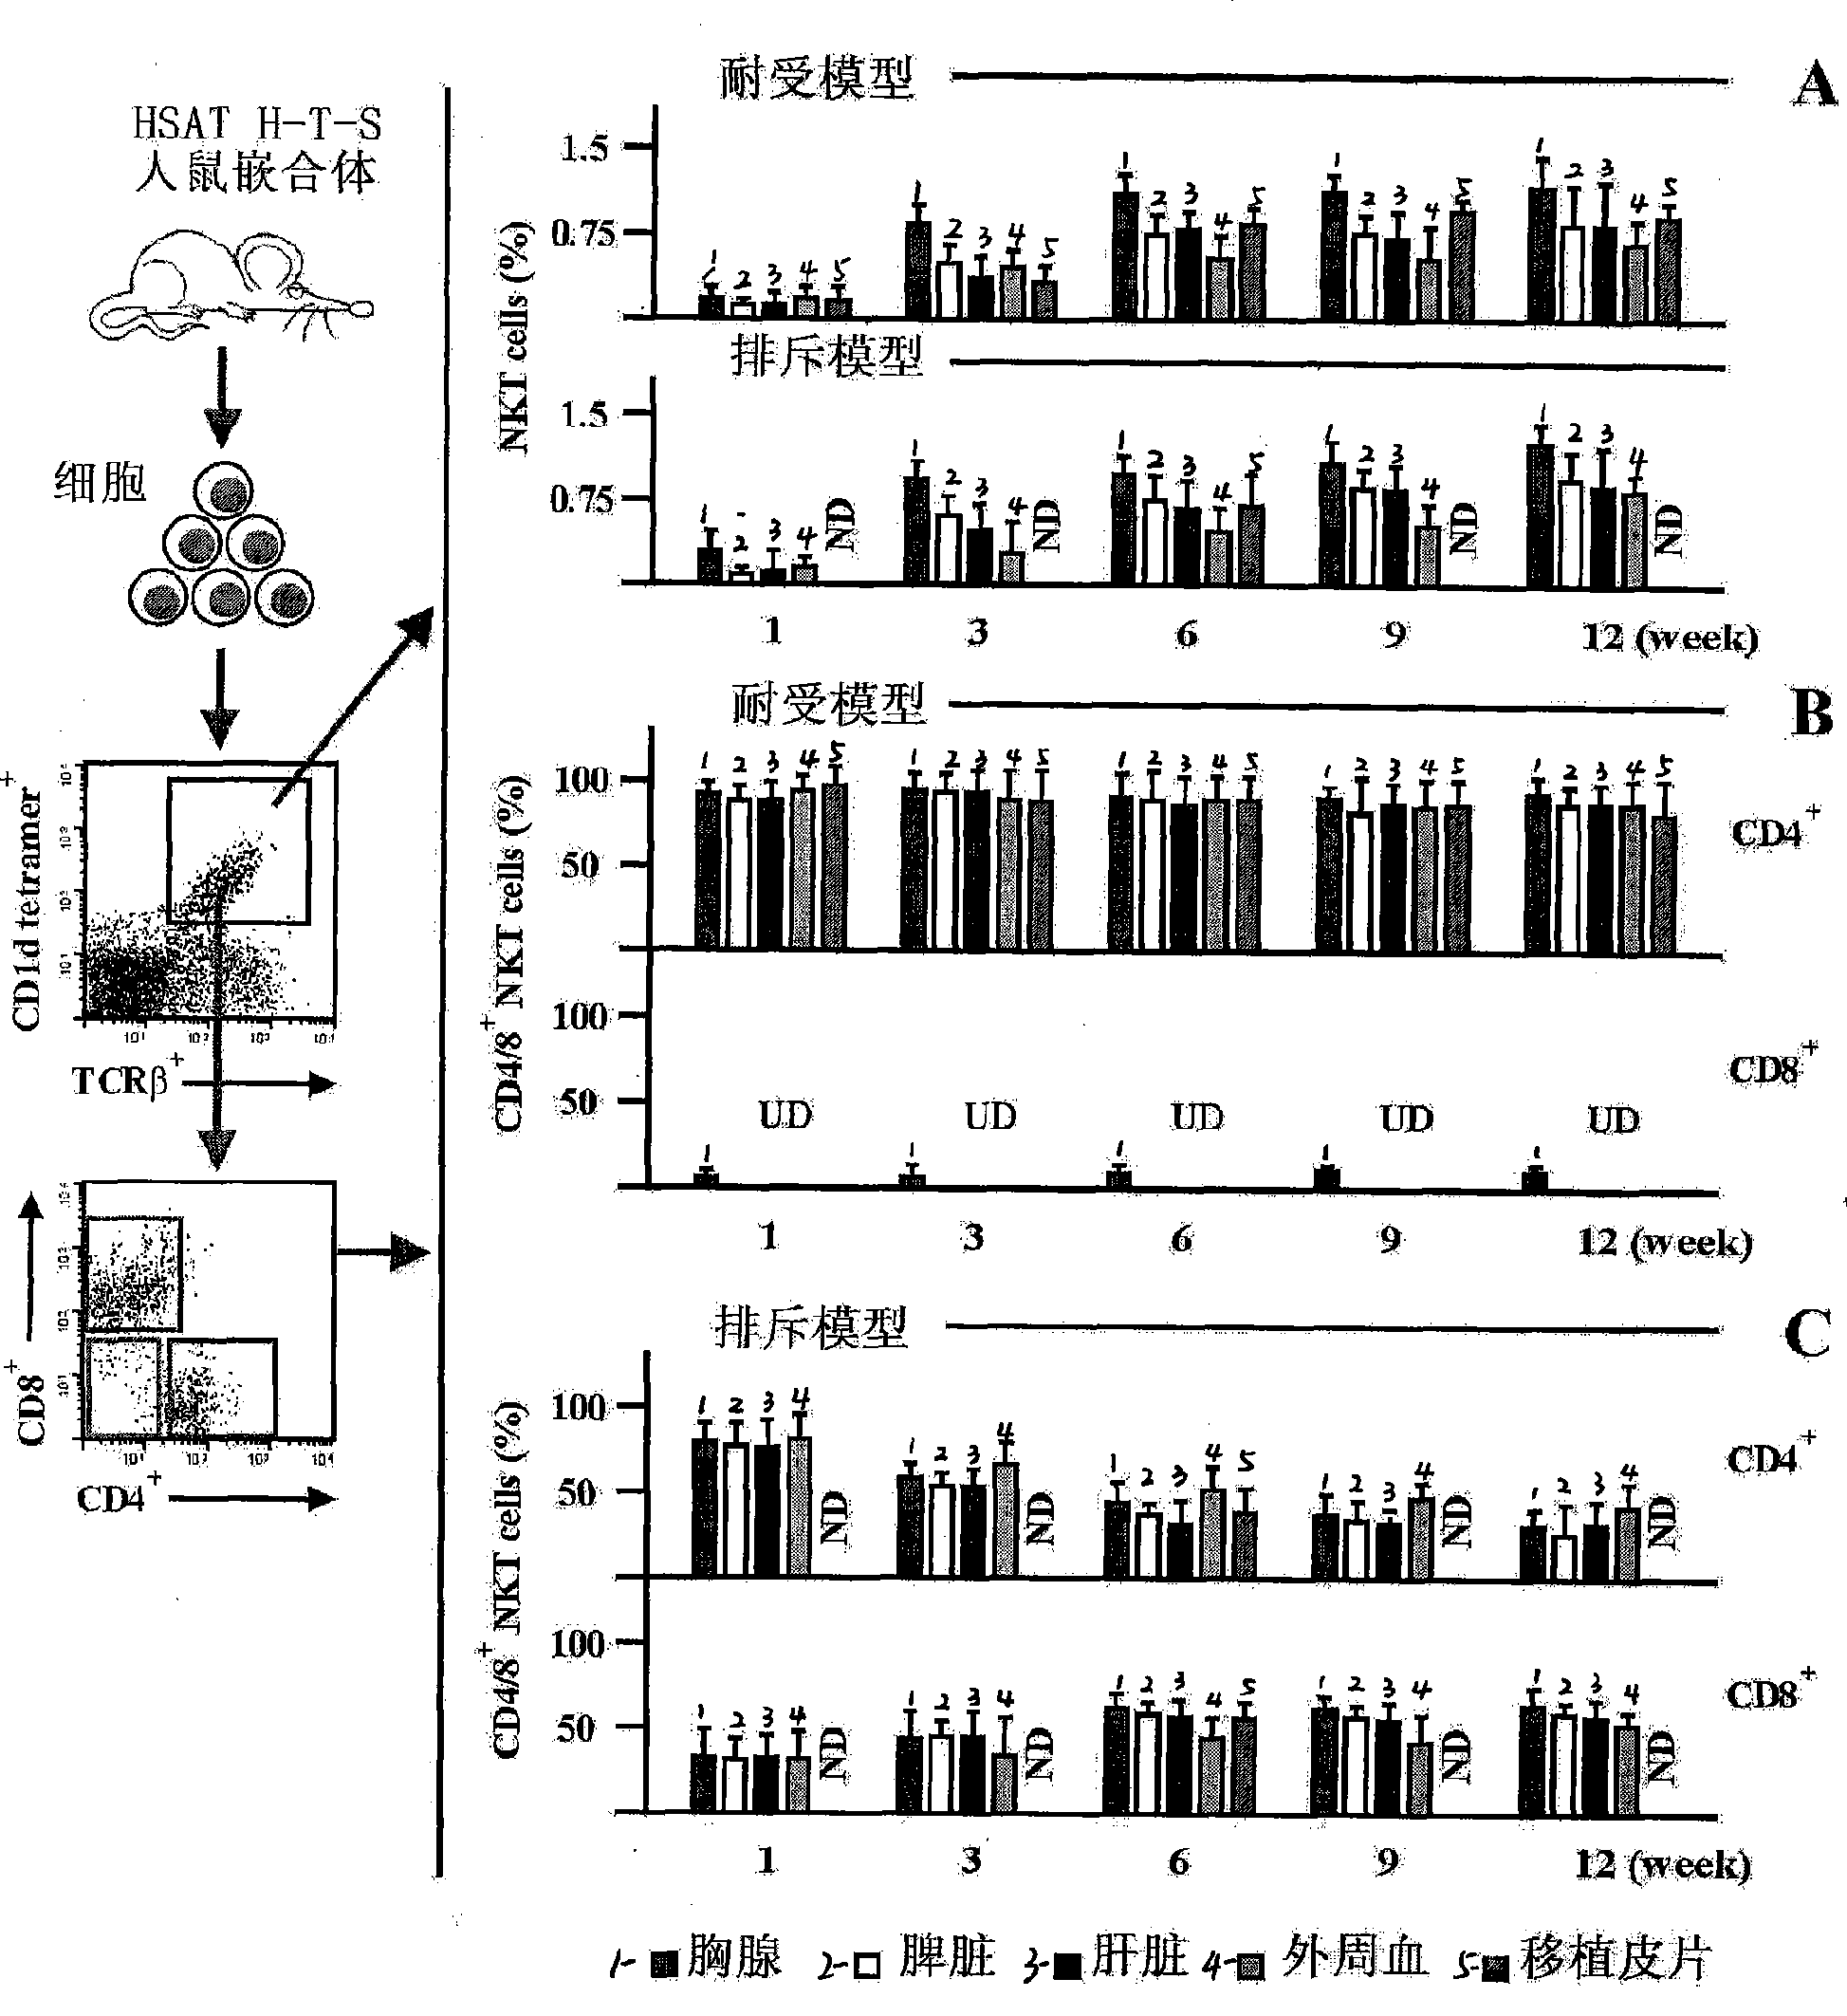 Method for constructing HSAT H-T-S mouse-human chimeric model and application